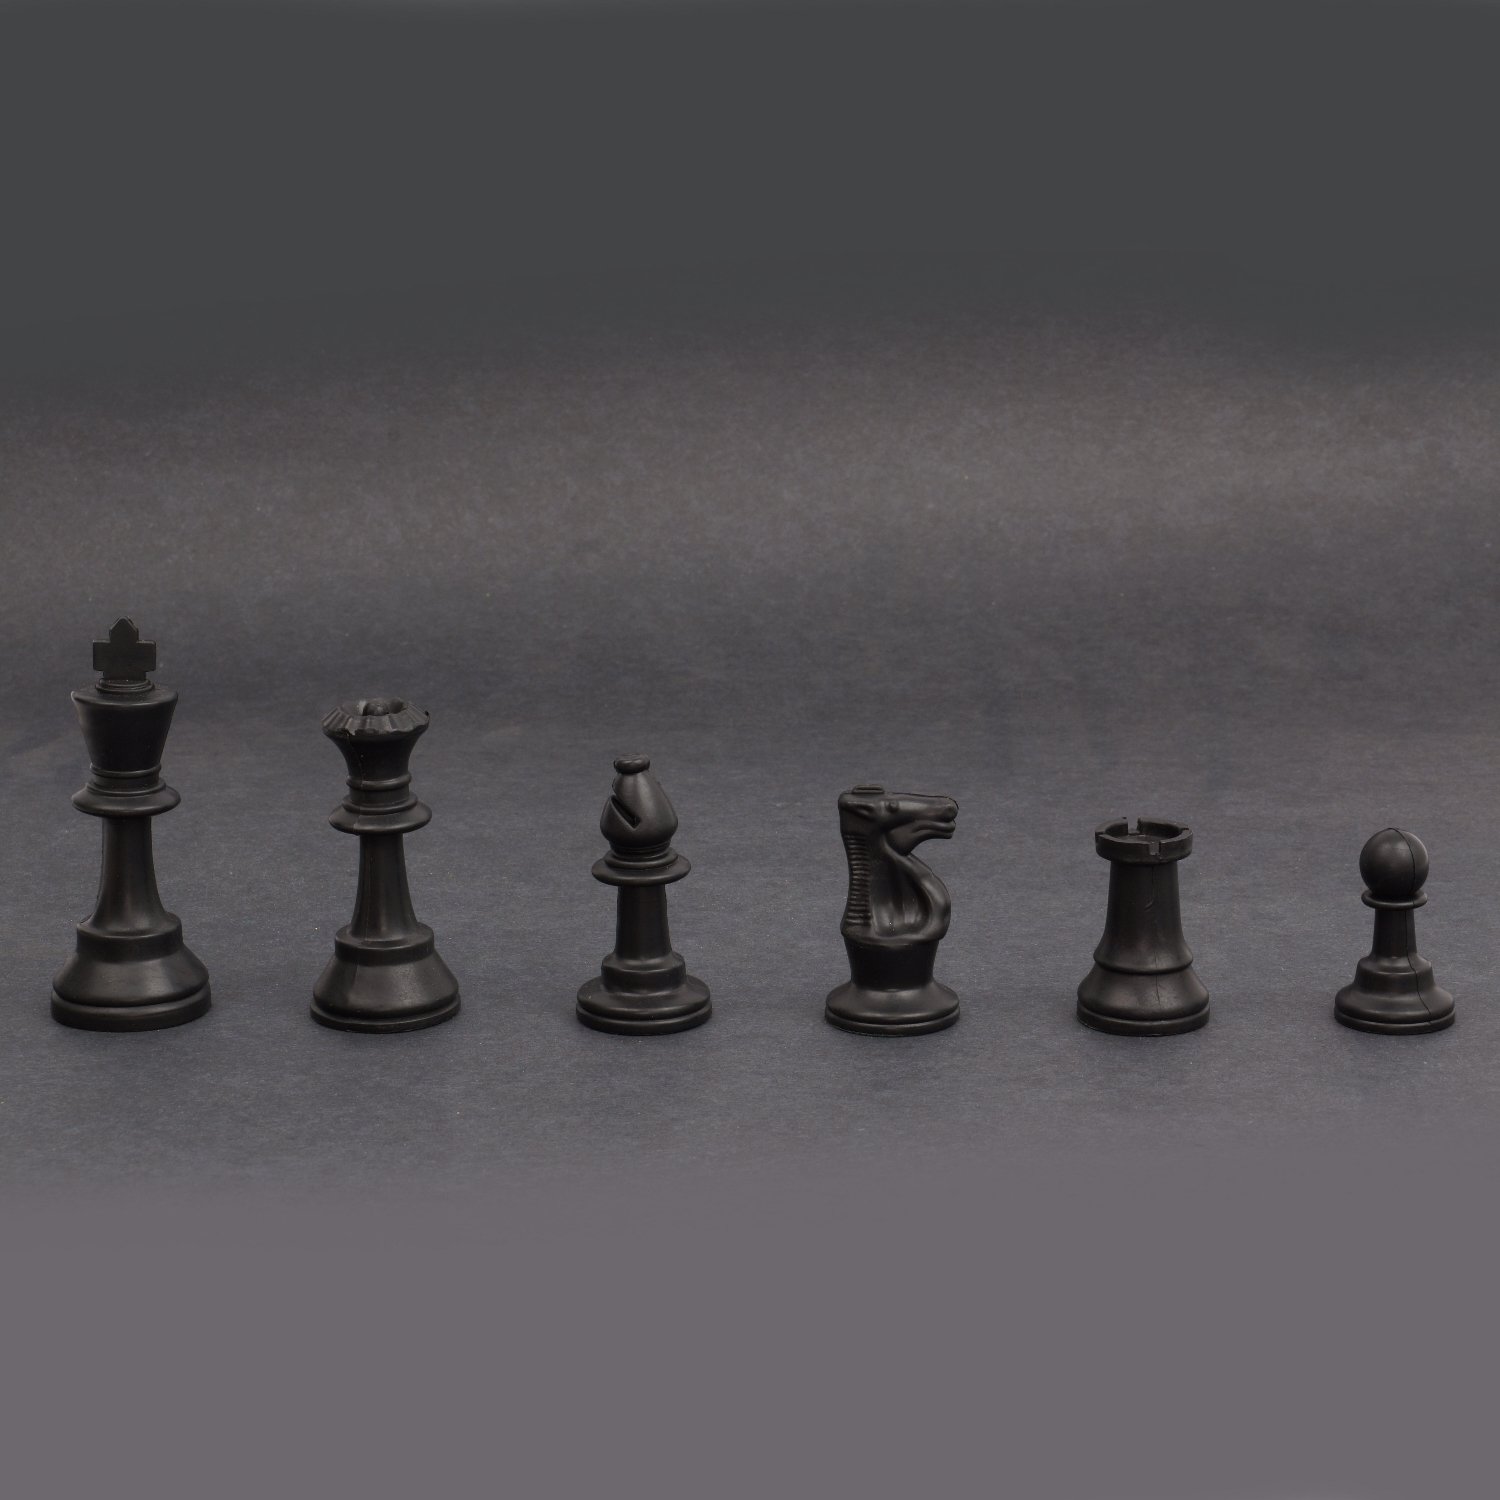 Single Weighted Chess Set Black & White Chess Pieces & 20" Black Vinyl Board 